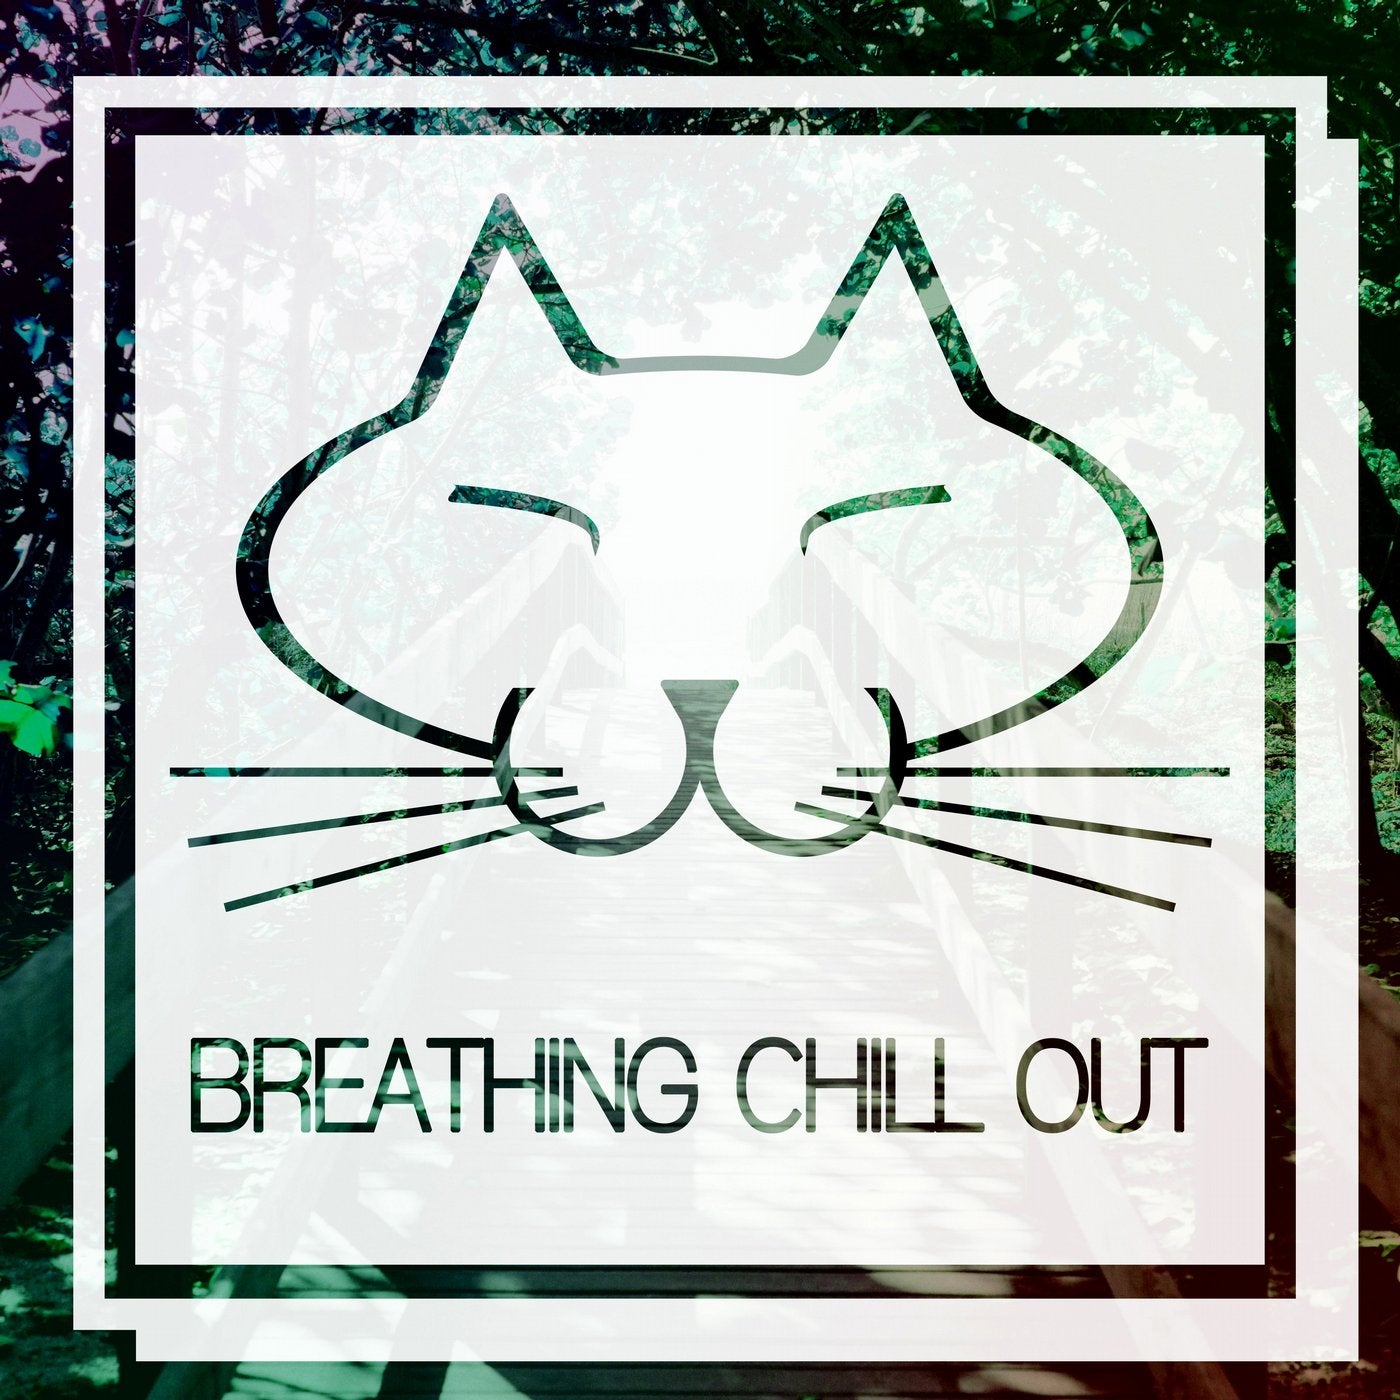 Breathing Chill Out